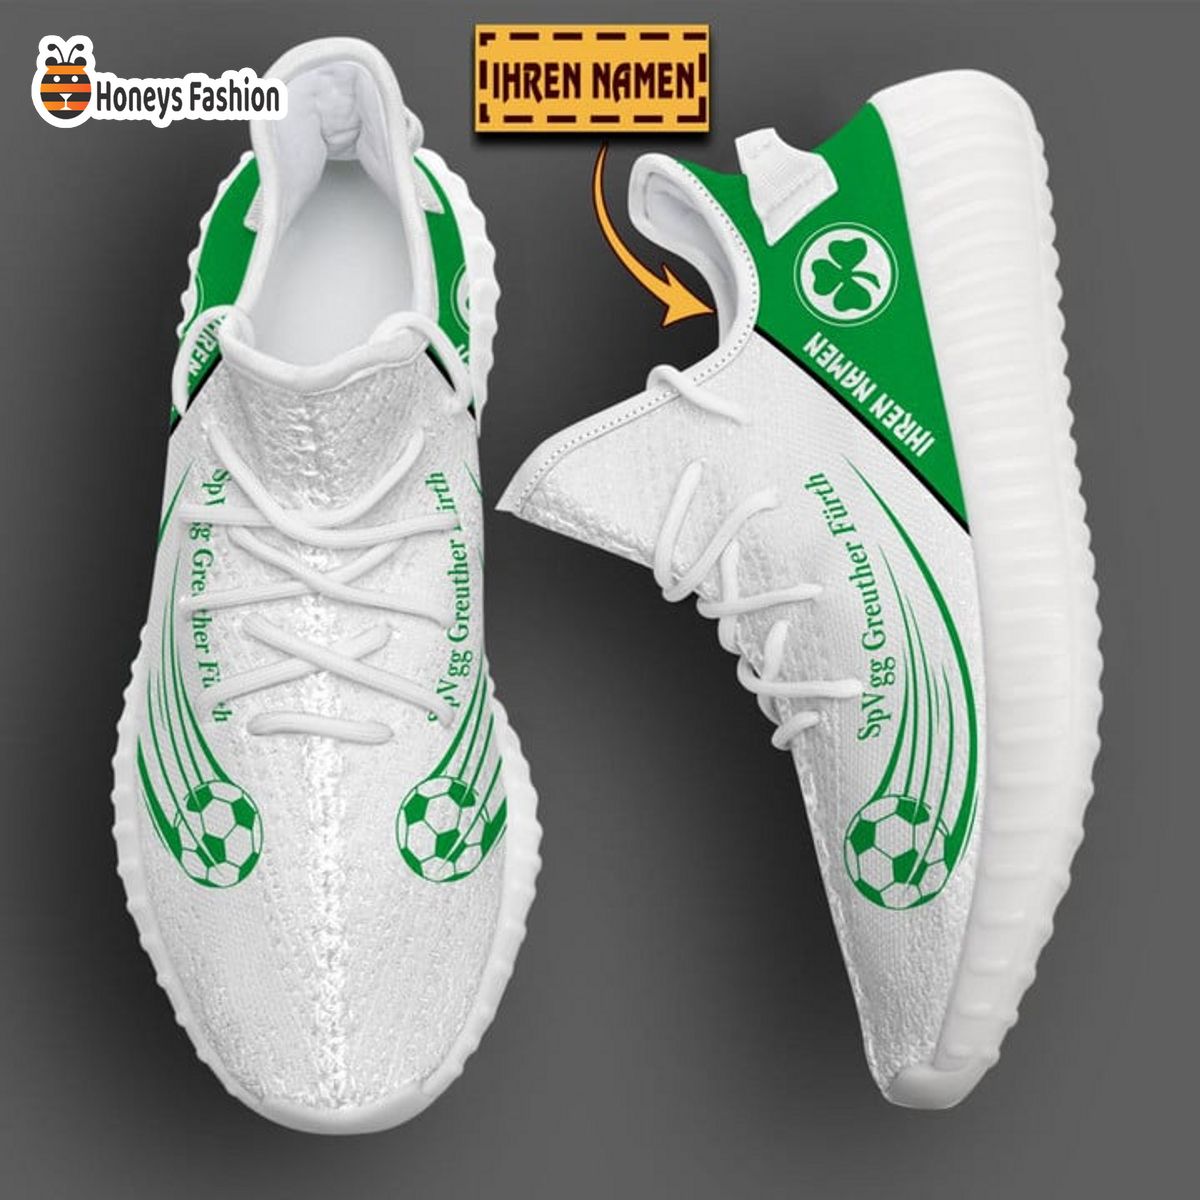 SpVgg Greuther Furth personalisiert yeezy sneaker